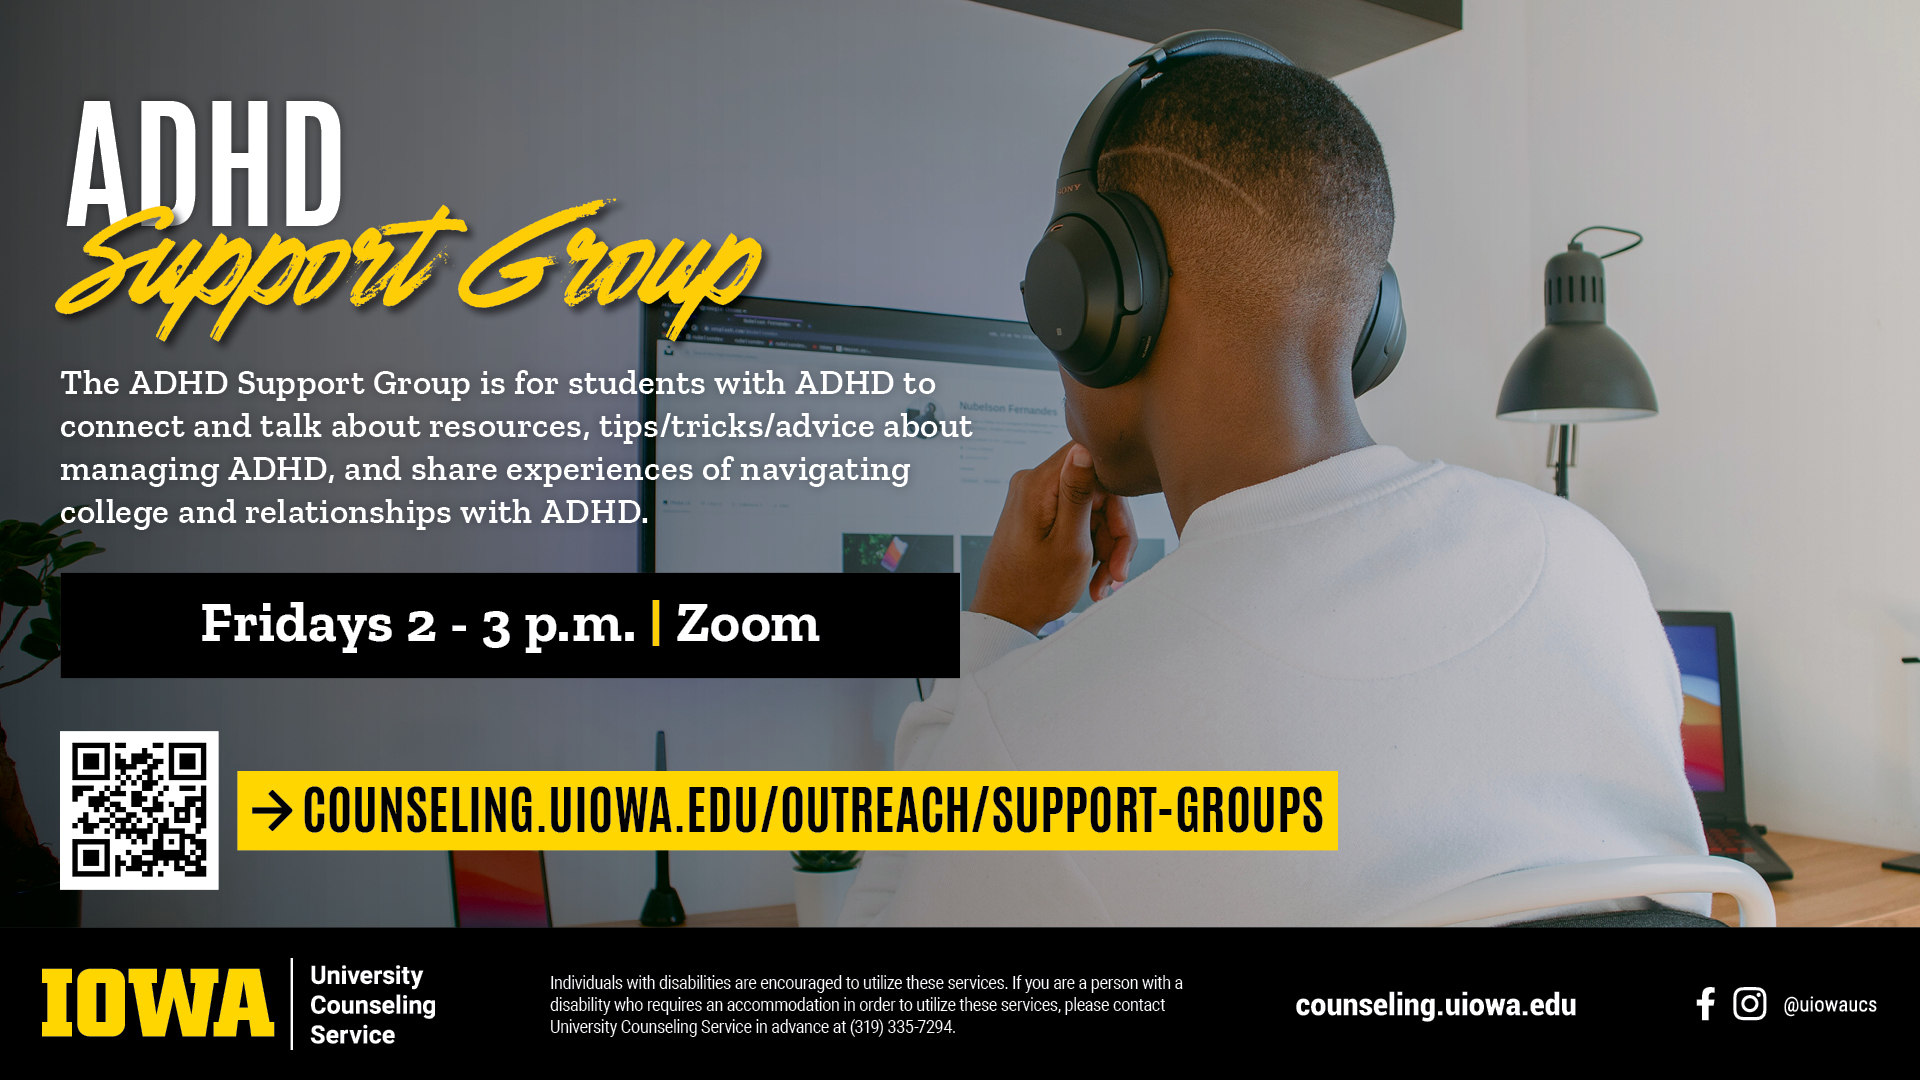 ADHD Support Group Fridays 2-3pm via Zoom counseling.uiowa.edu/outreach/support-groups